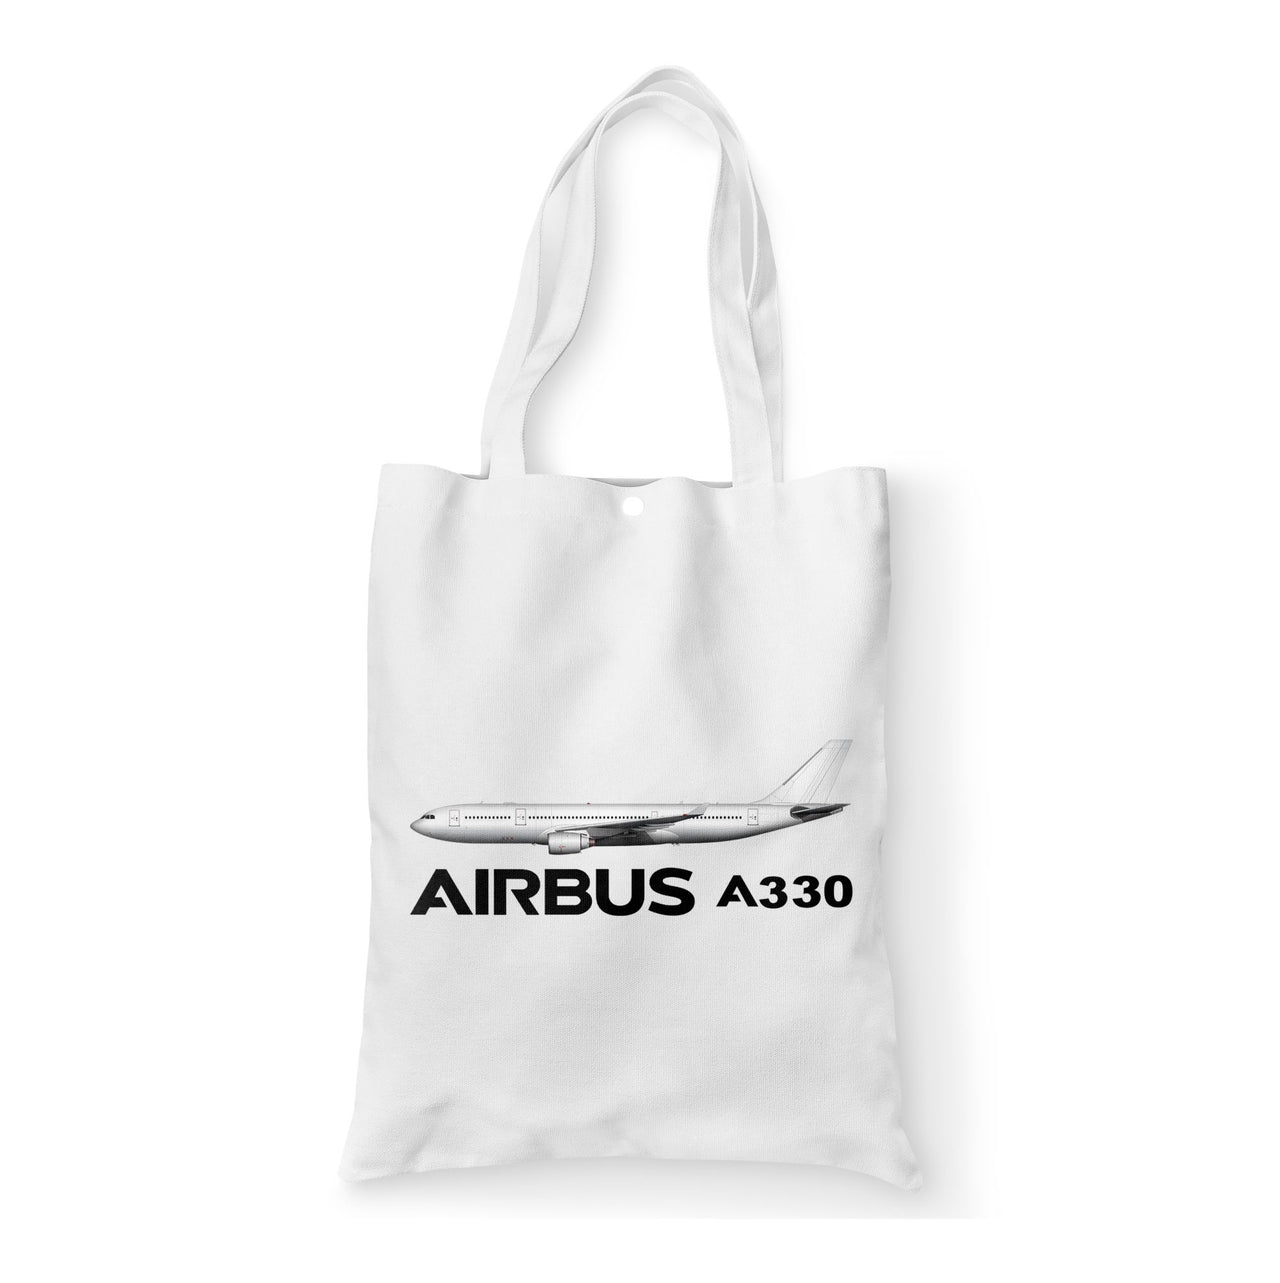 The Airbus A330 Designed Tote Bags